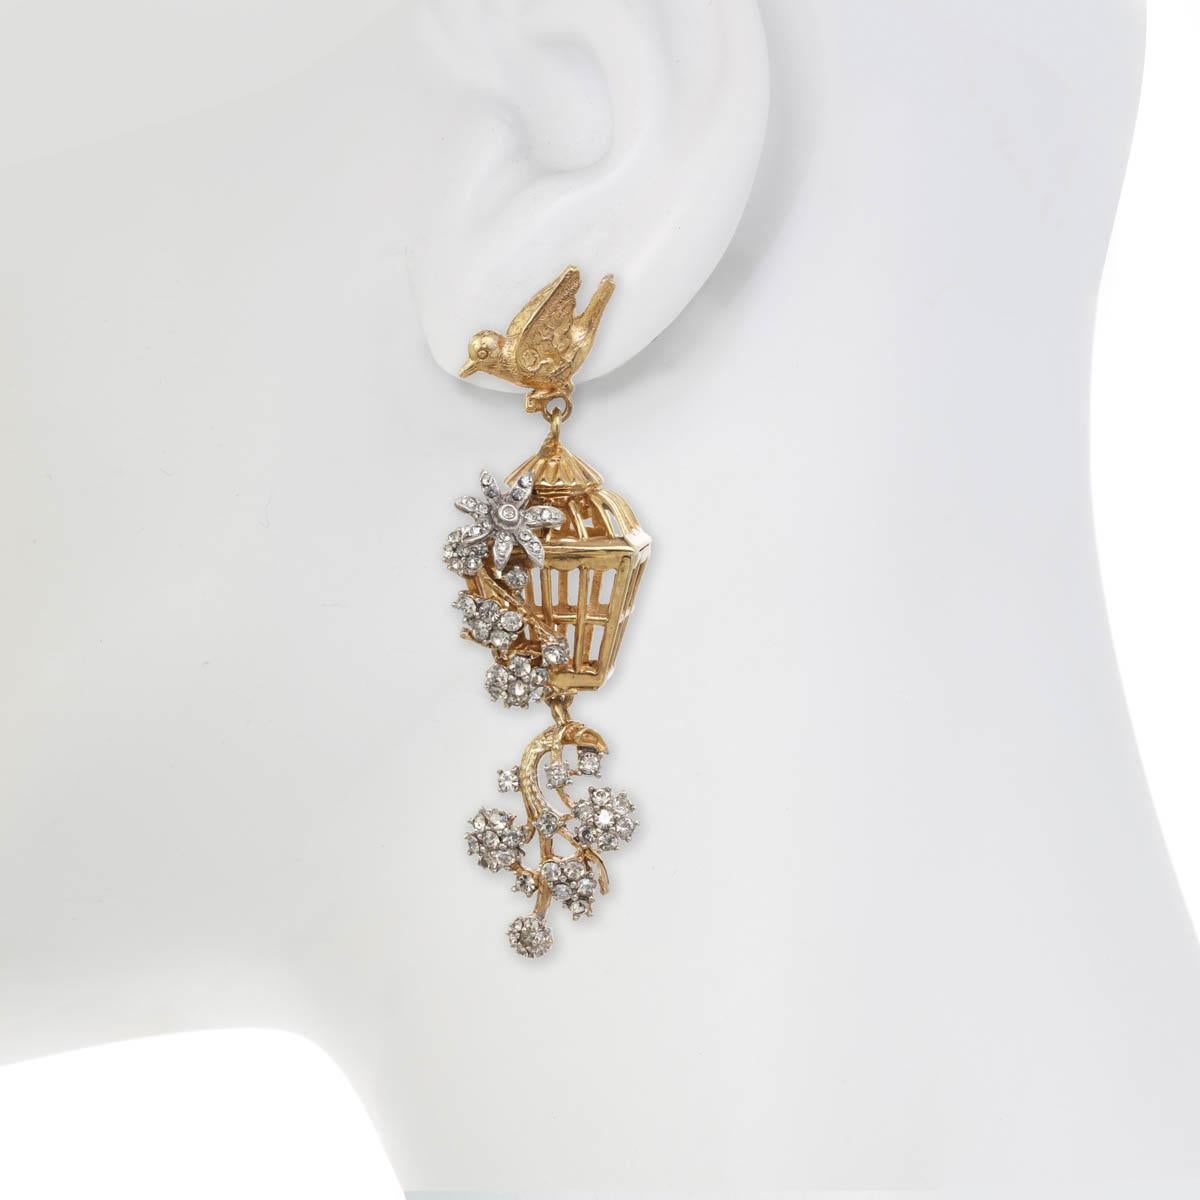 The Romantic Bird Cage Earring, from season I of the Ines x Ciner collaboration, has vintage  glass petals and gorgeous rhinestone accents, offering a glamorous yet amorous statement earring. We love the two-tone look and hope you will too!